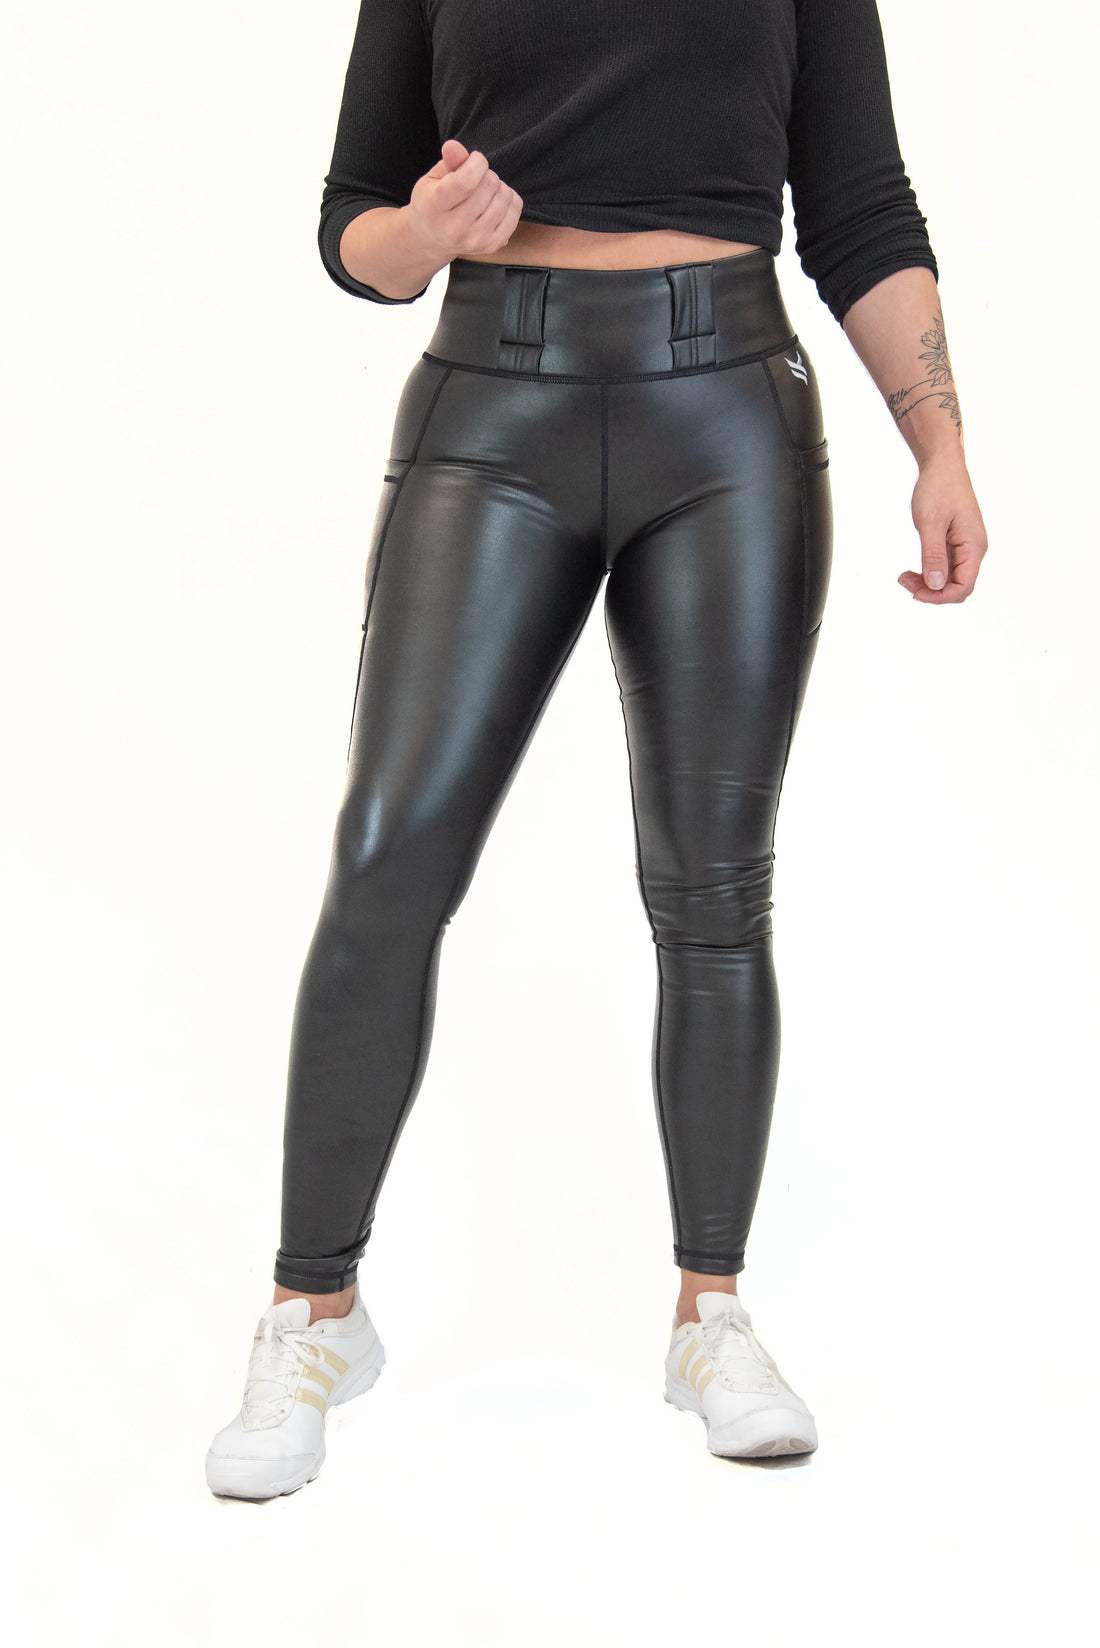  MCEDAR High Elasticity Faux Leather Legging for Women (Black Z,  X-Small) : Clothing, Shoes & Jewelry